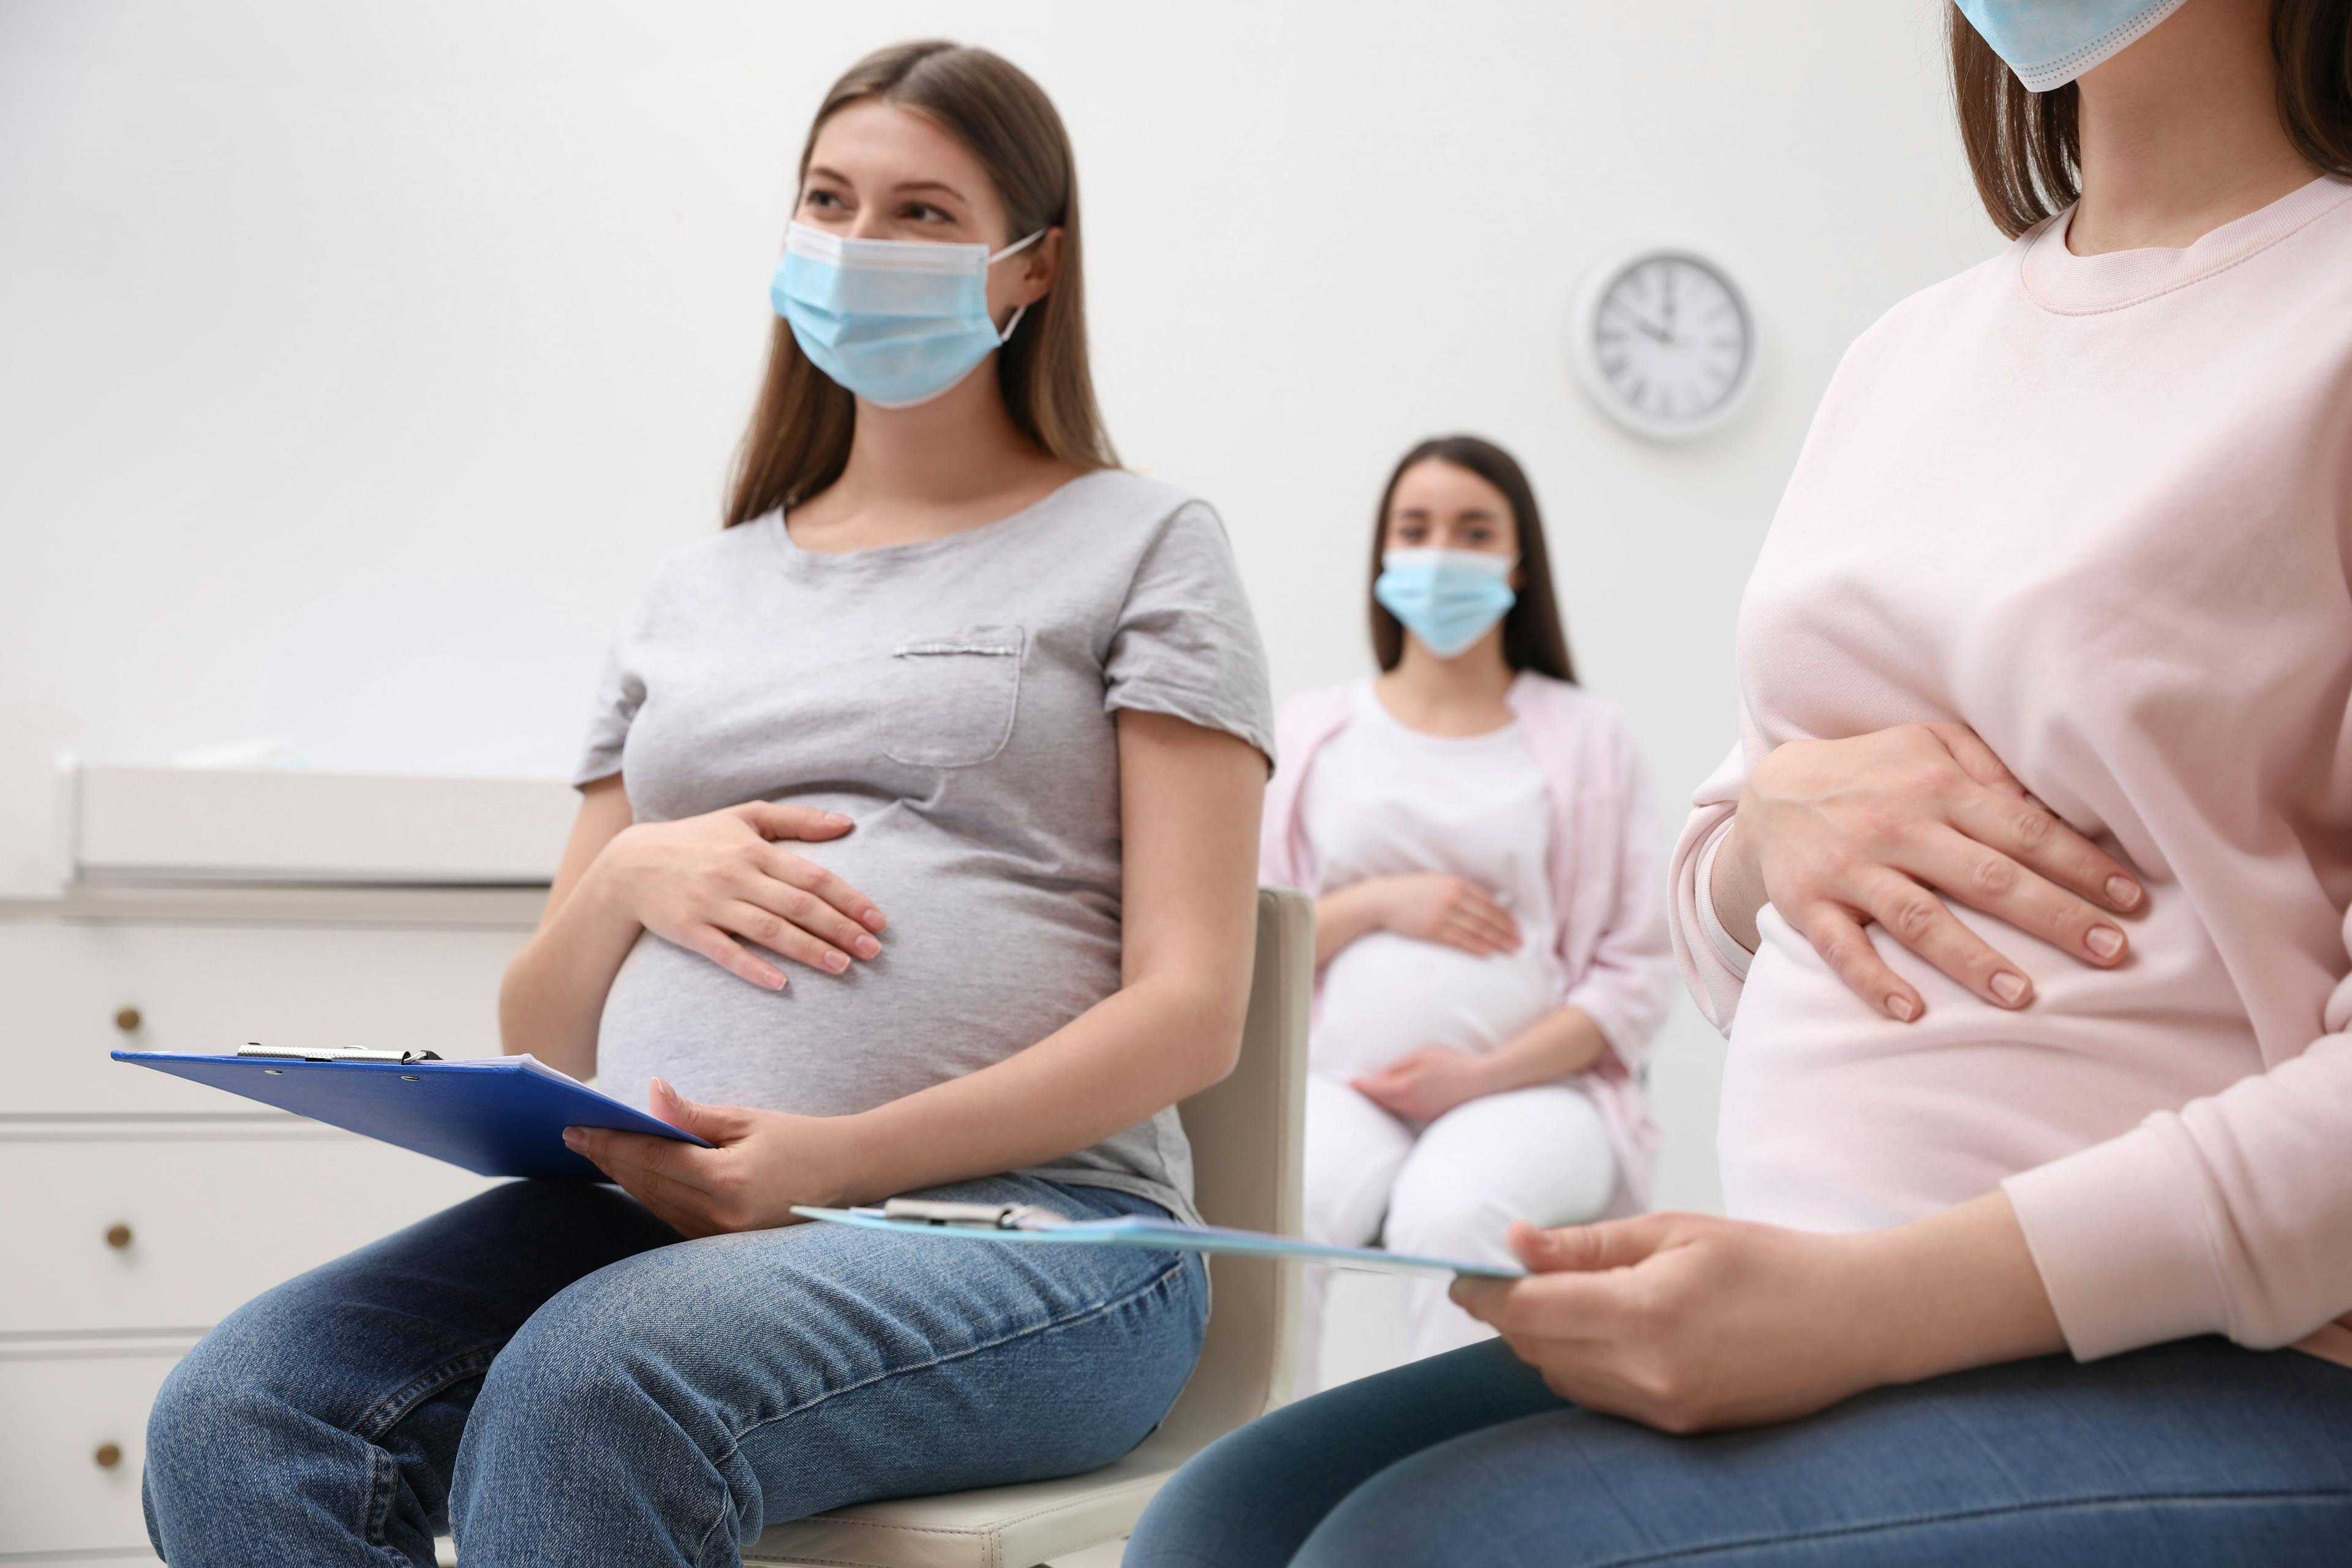 Data shows that pregnant individuals have 3 times the risk of contracting COVID vs the general population | image credit: New Africa - stock.adobe.com